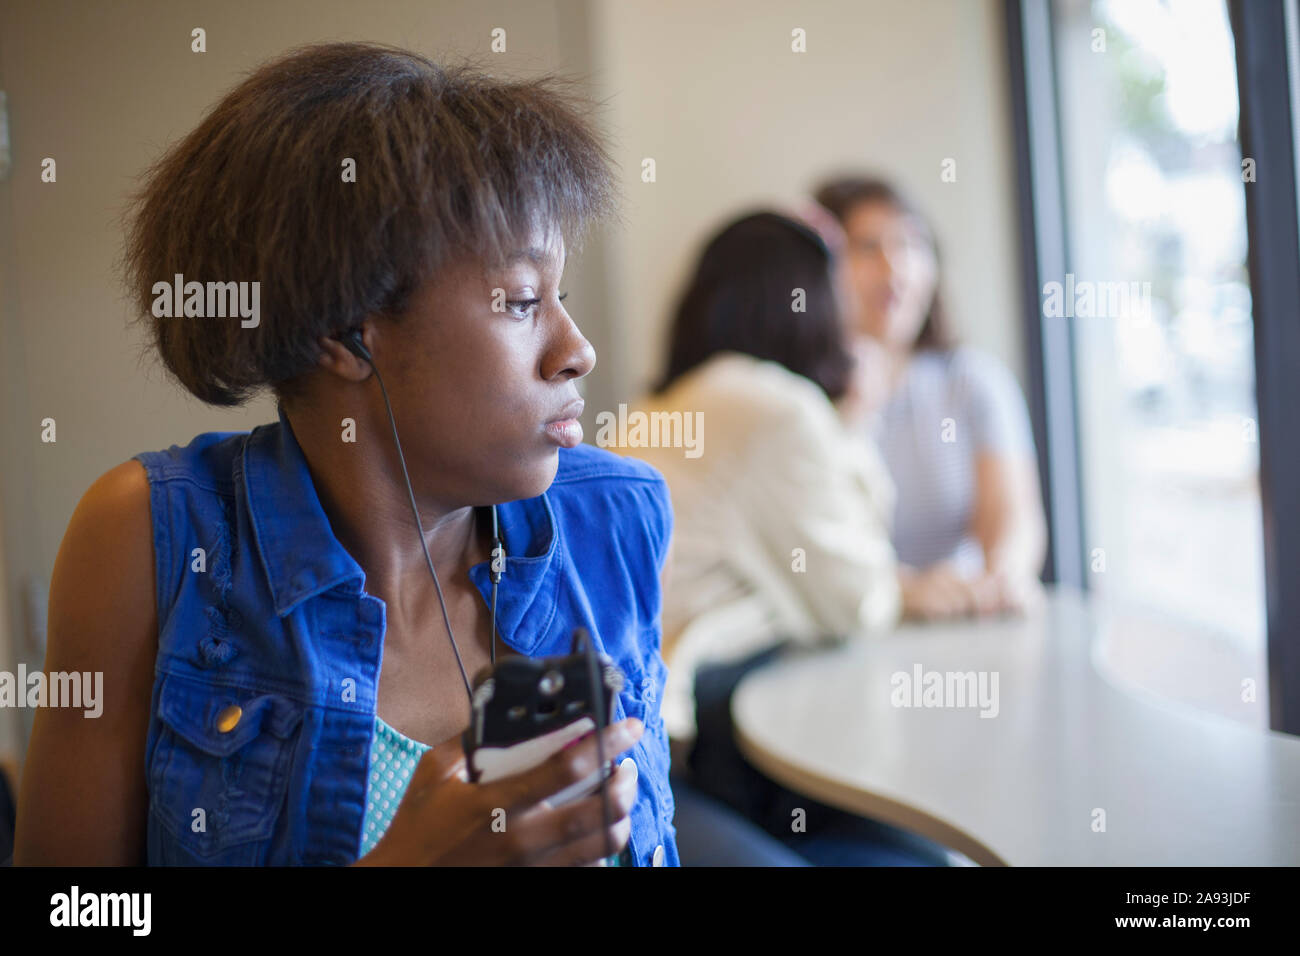 Woman with Learning Disability listening to music Stock Photo